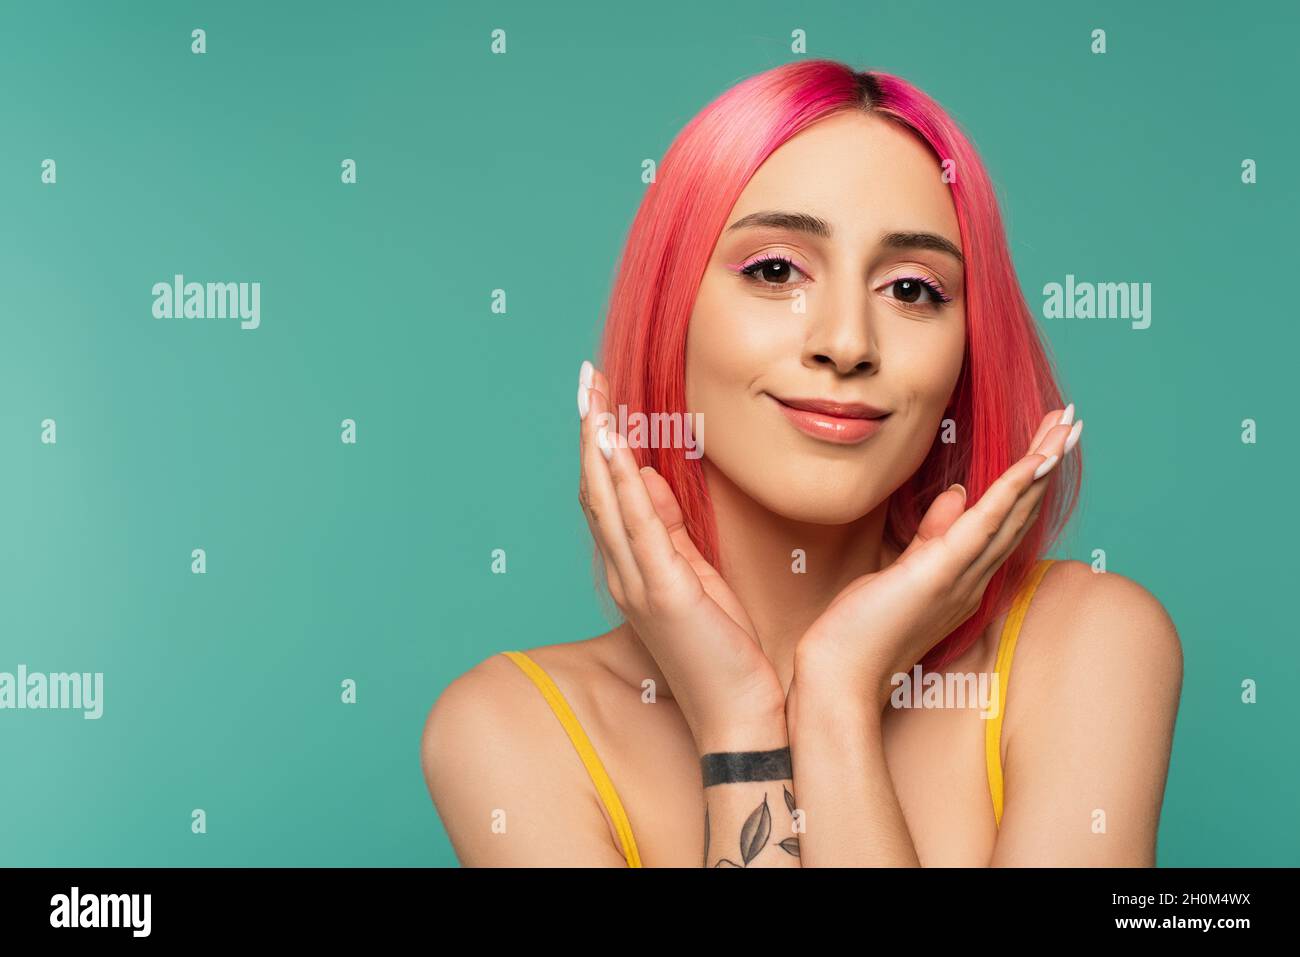 tattooed young woman with pink dyed hair smiling isolated on turquoise Stock Photo